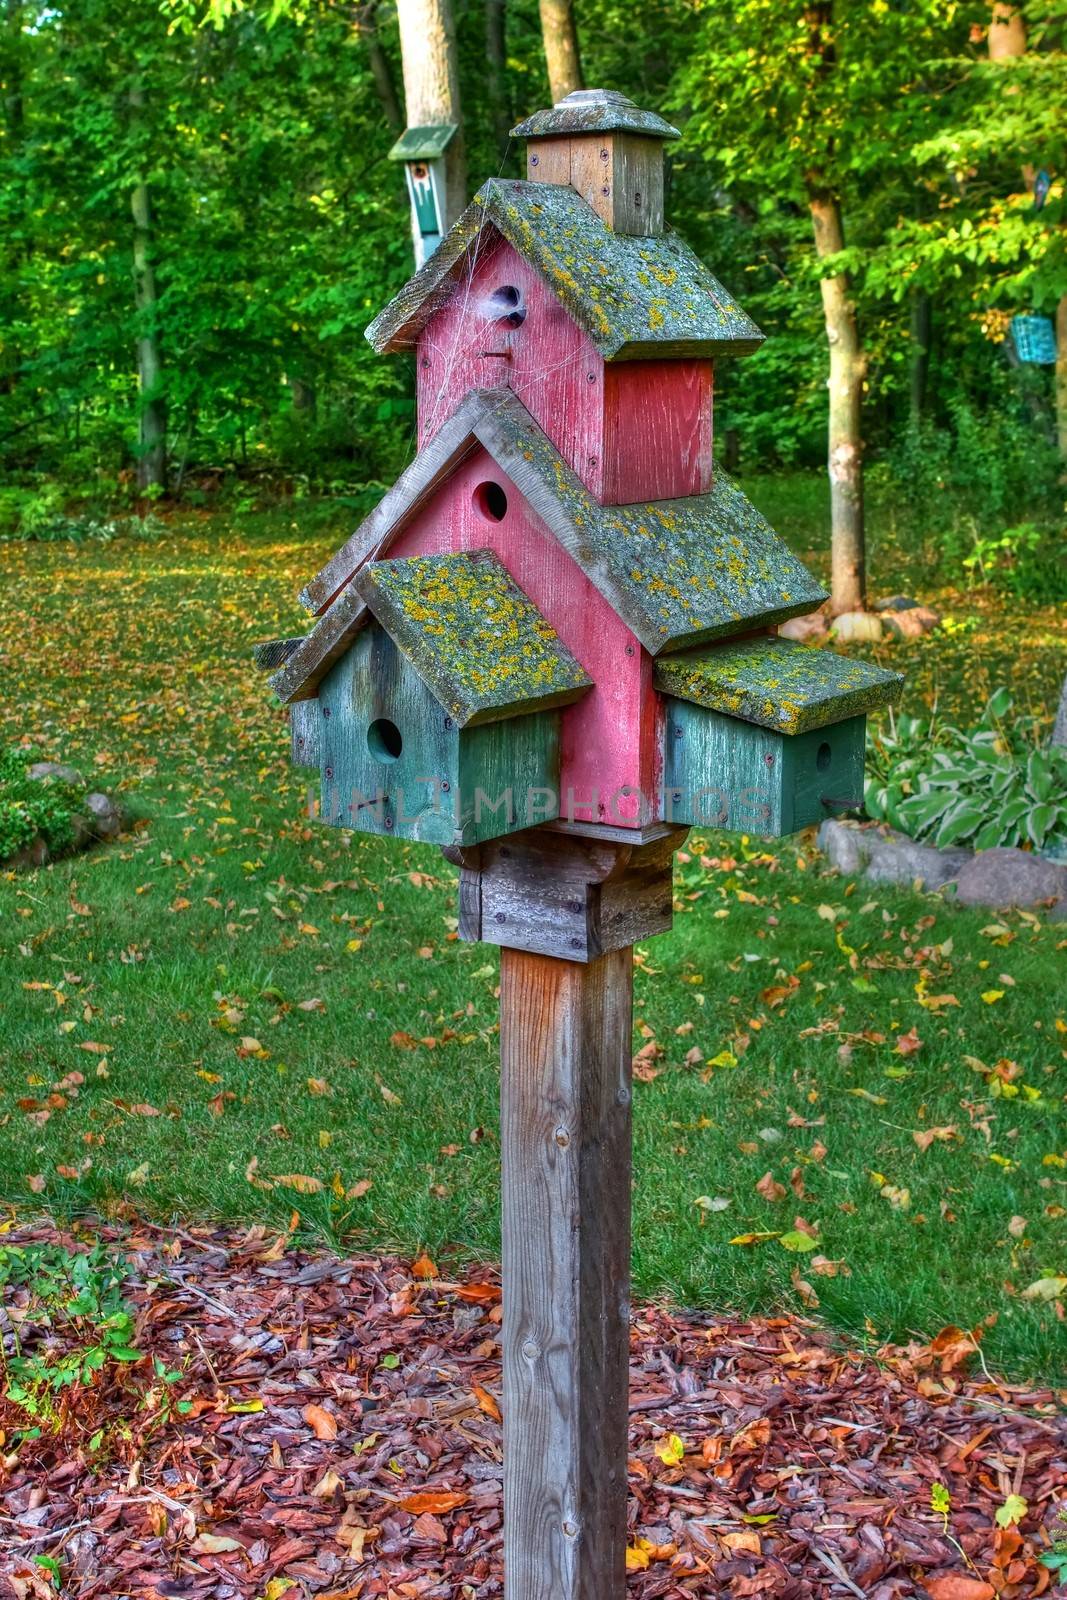 Abandoned Bird House with spider webs at the front door in High Dynamic Range.